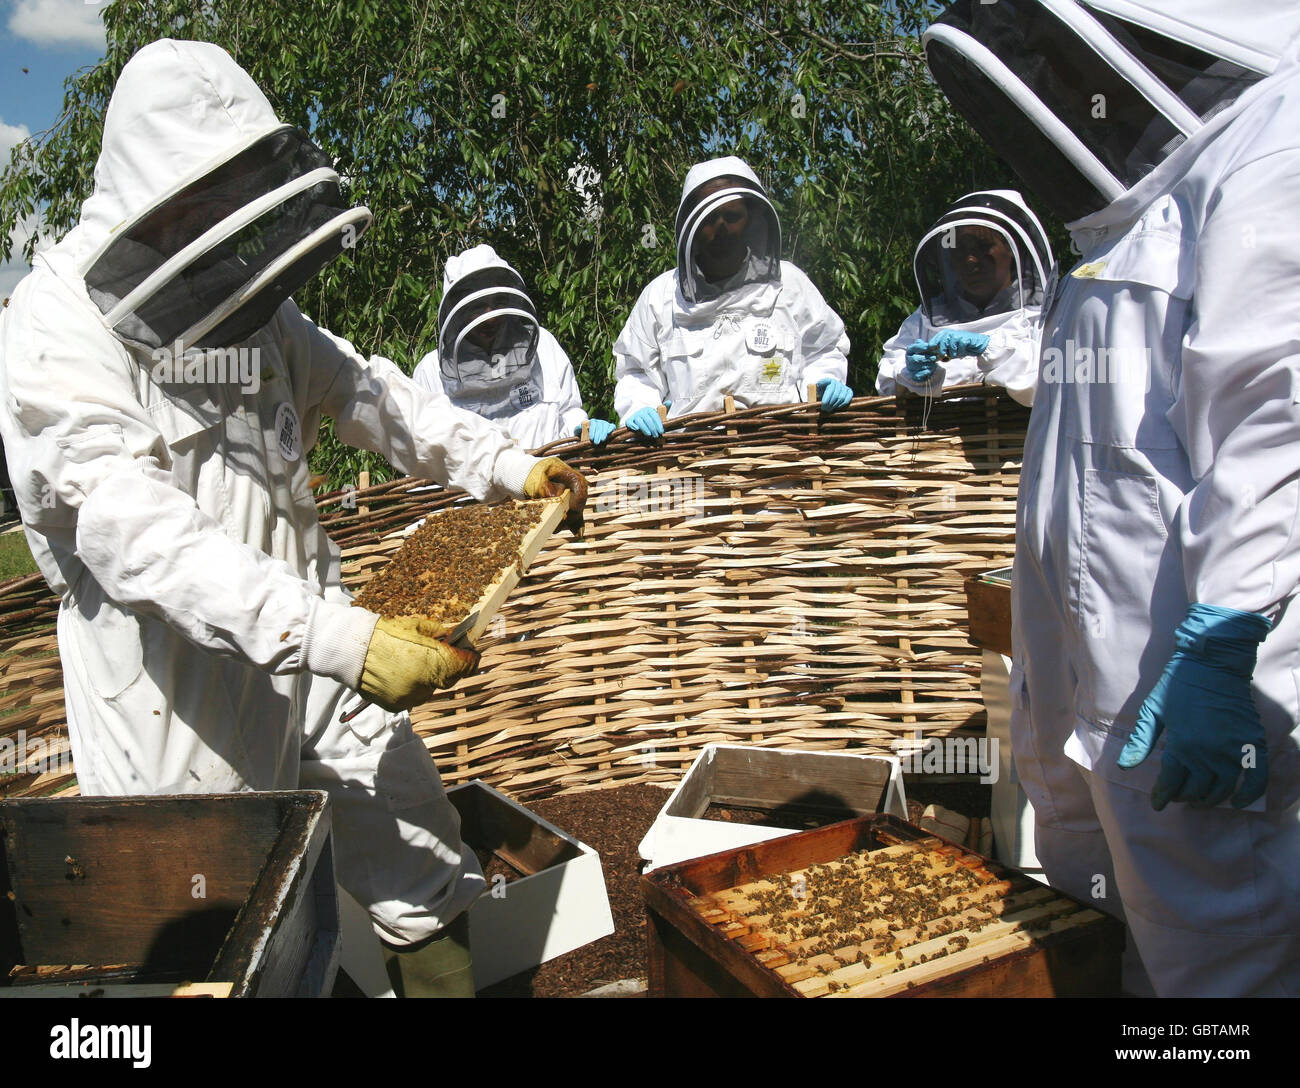 Chief Bee Advisor for Kew Gardens Tony Smith (left) and Horticulturalist Alison Smith (right), watched by Kew trainee beekeepers, reintroduce some 20,000 honeybees into two new hives at Kew Gardens. Stock Photo